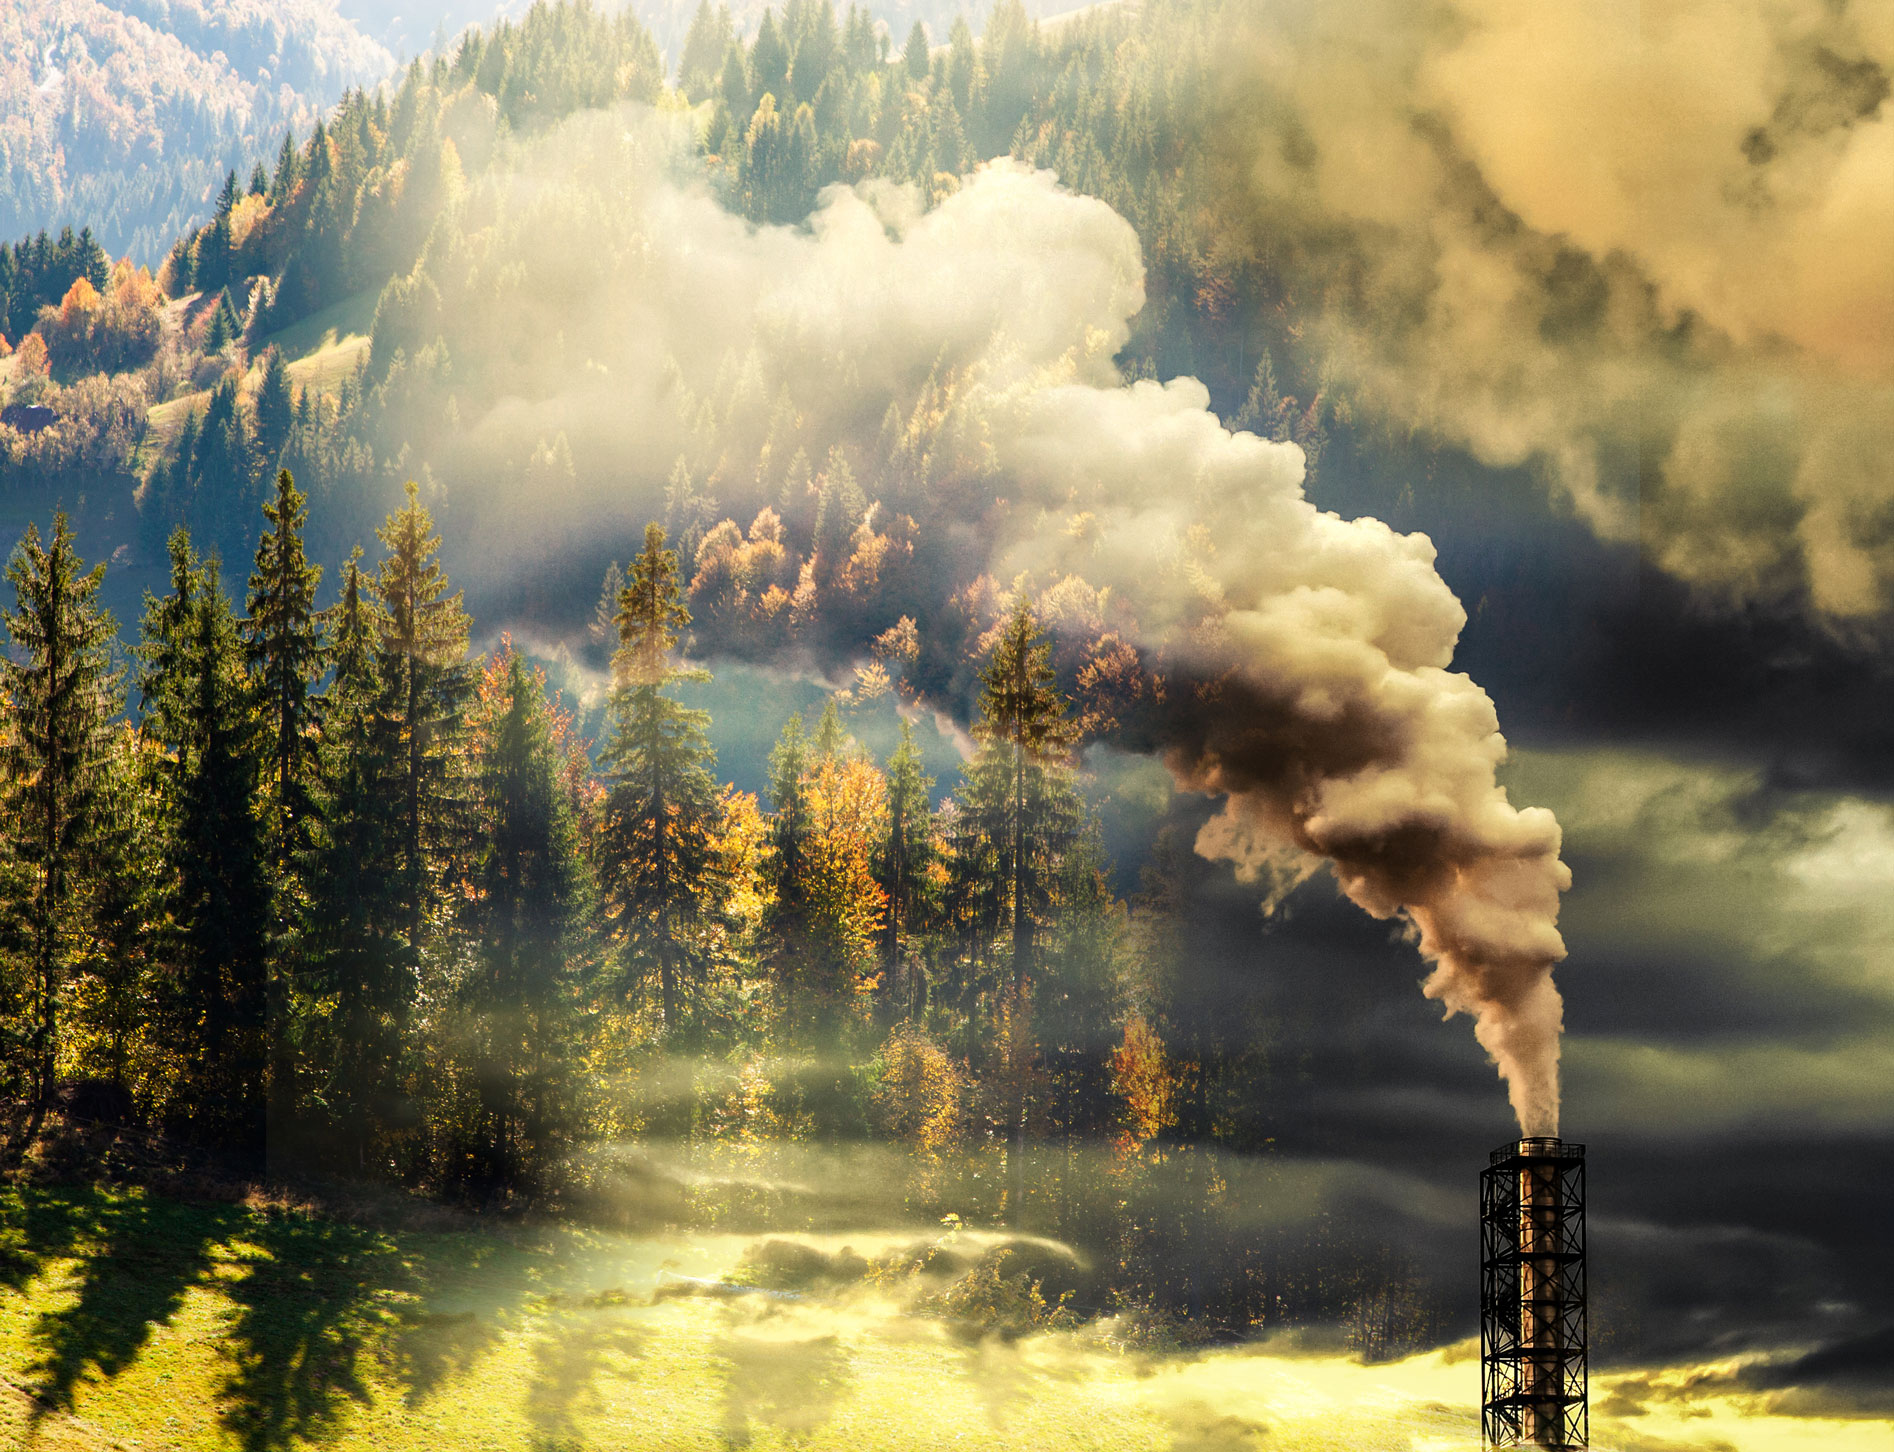 a power plant chimney pumps out polluting smoke in front of a forested mountainside